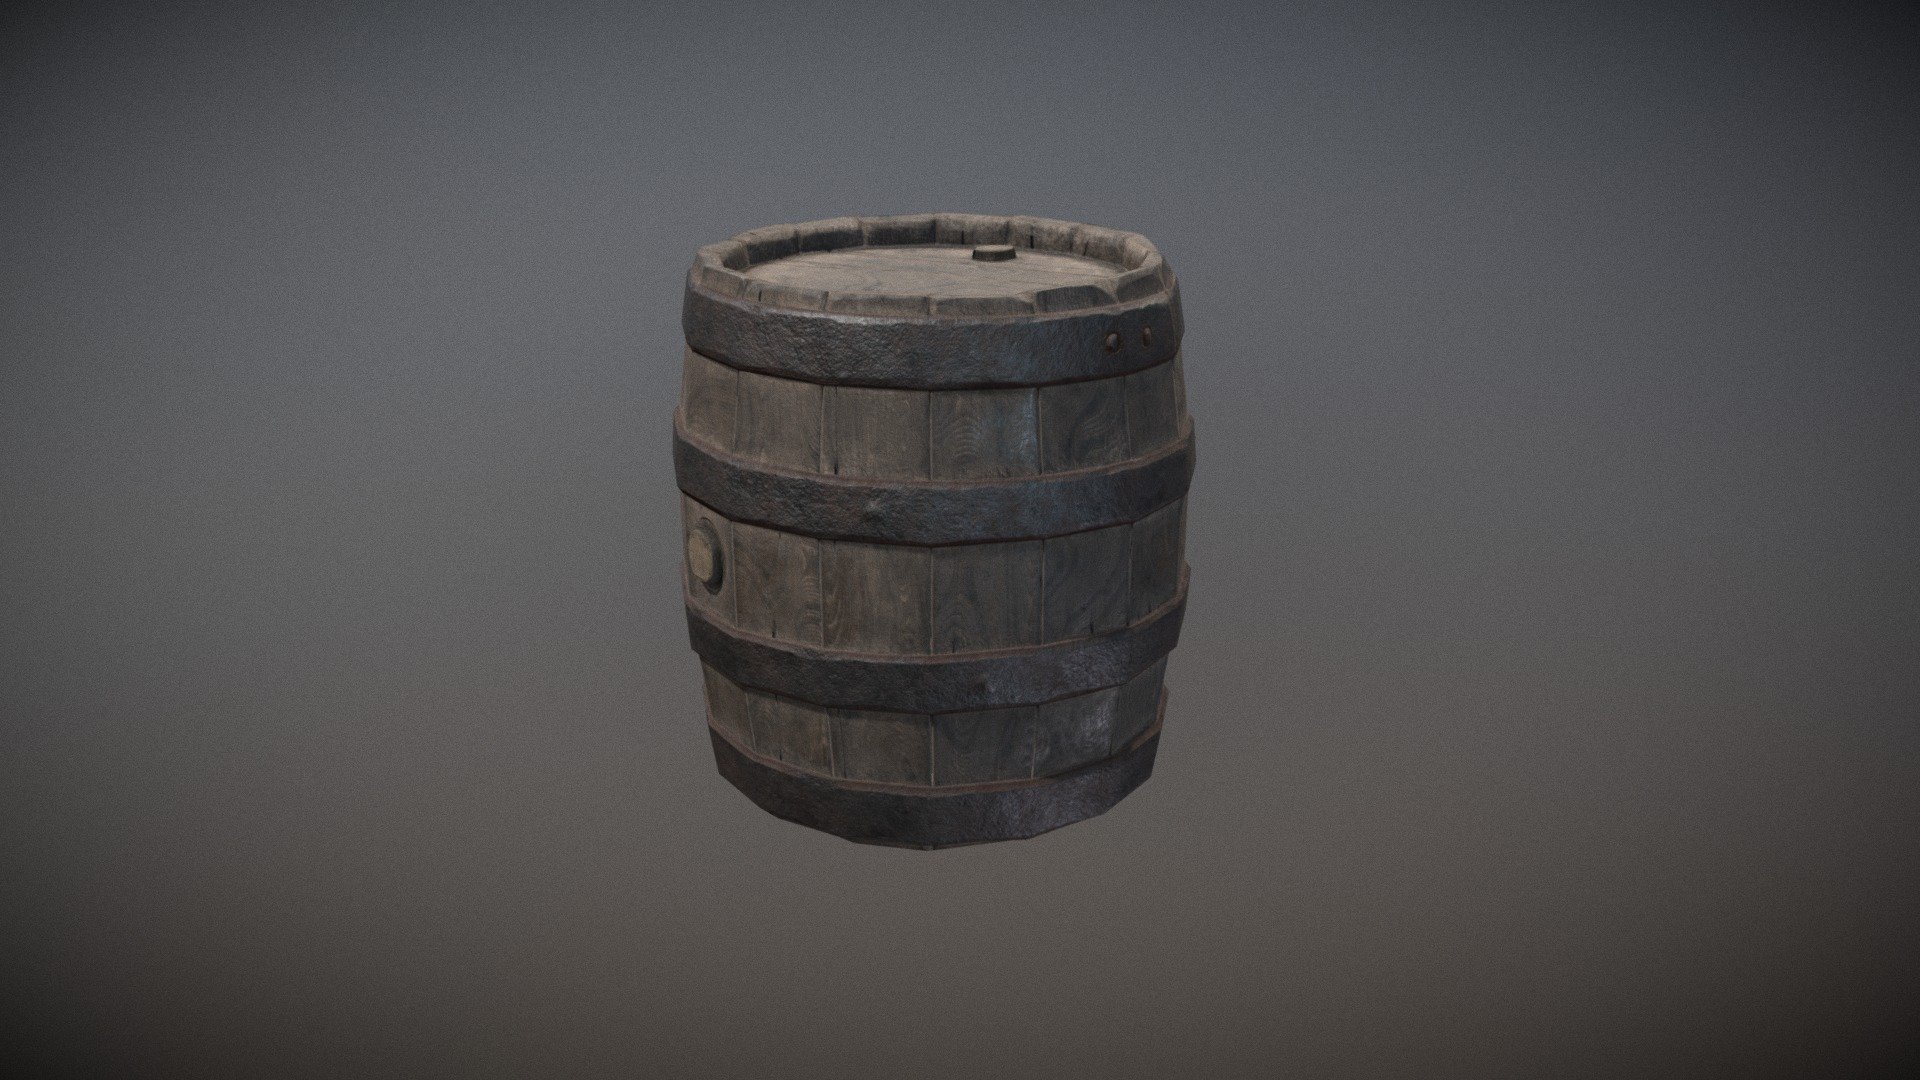 A small barrel.

LODs done by hand

Part of the “Old Tavern” set - https://goo.gl/KuknSf Part of the “Old” series - https://goo.gl/XWypwo - Small Barrel - Buy Royalty Free 3D model by inedible.red (@inediblered) 3d model